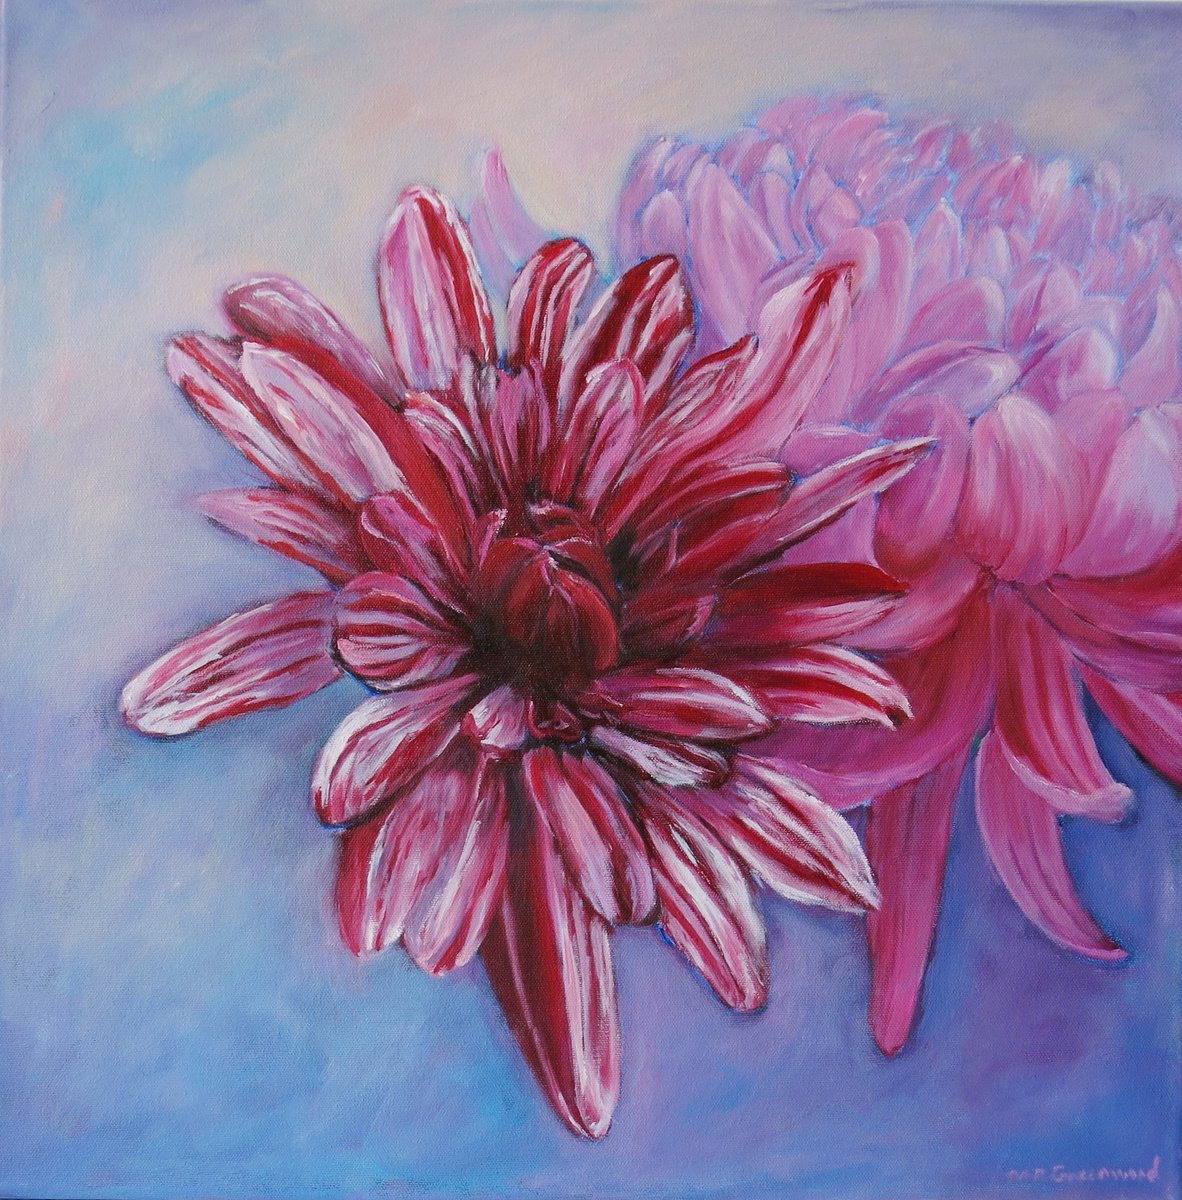 Deep Red and Pink Chrysanths by Maureen Greenwood